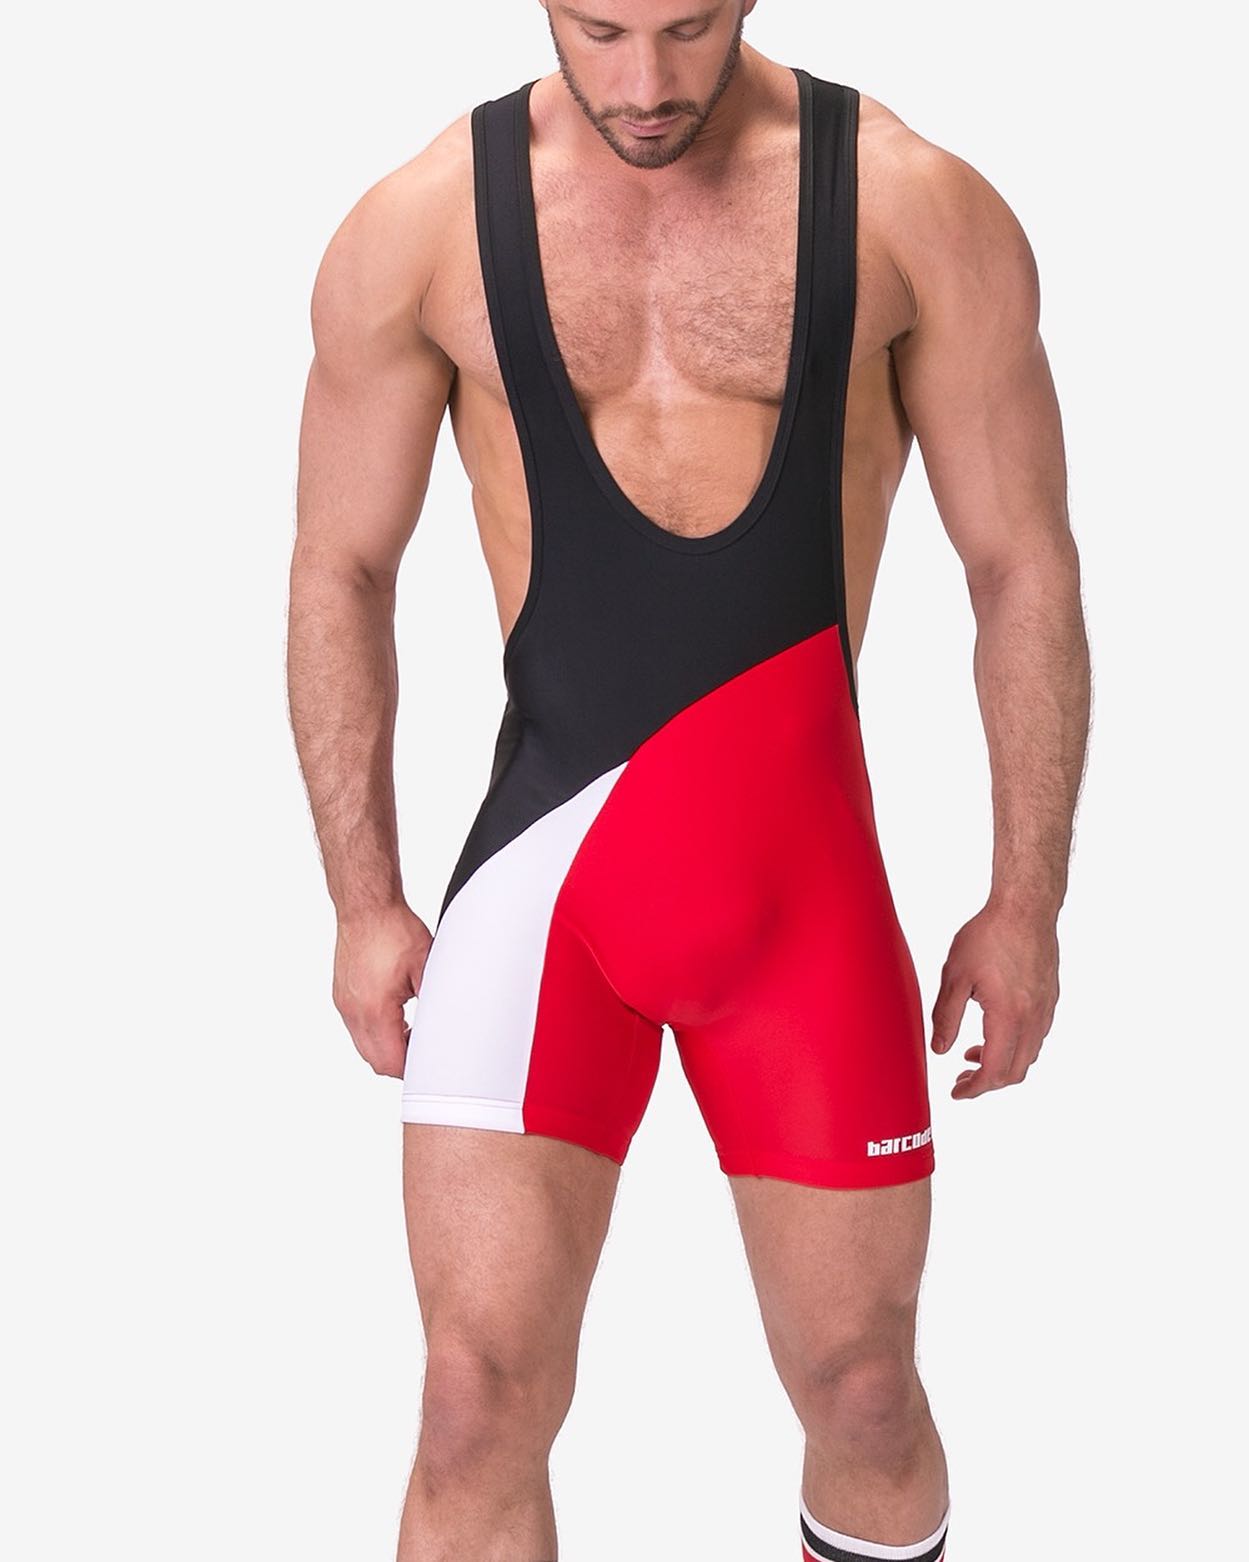 The Singlet Luckenwalde from Barcode in black/white/red is back! Perfect for sports of all kinds, for play, for the club and more:
_____
menandunderwear.com/shop
_____
#singlet #barcode #redwhiteblack #wrestlinginspiration #shopping